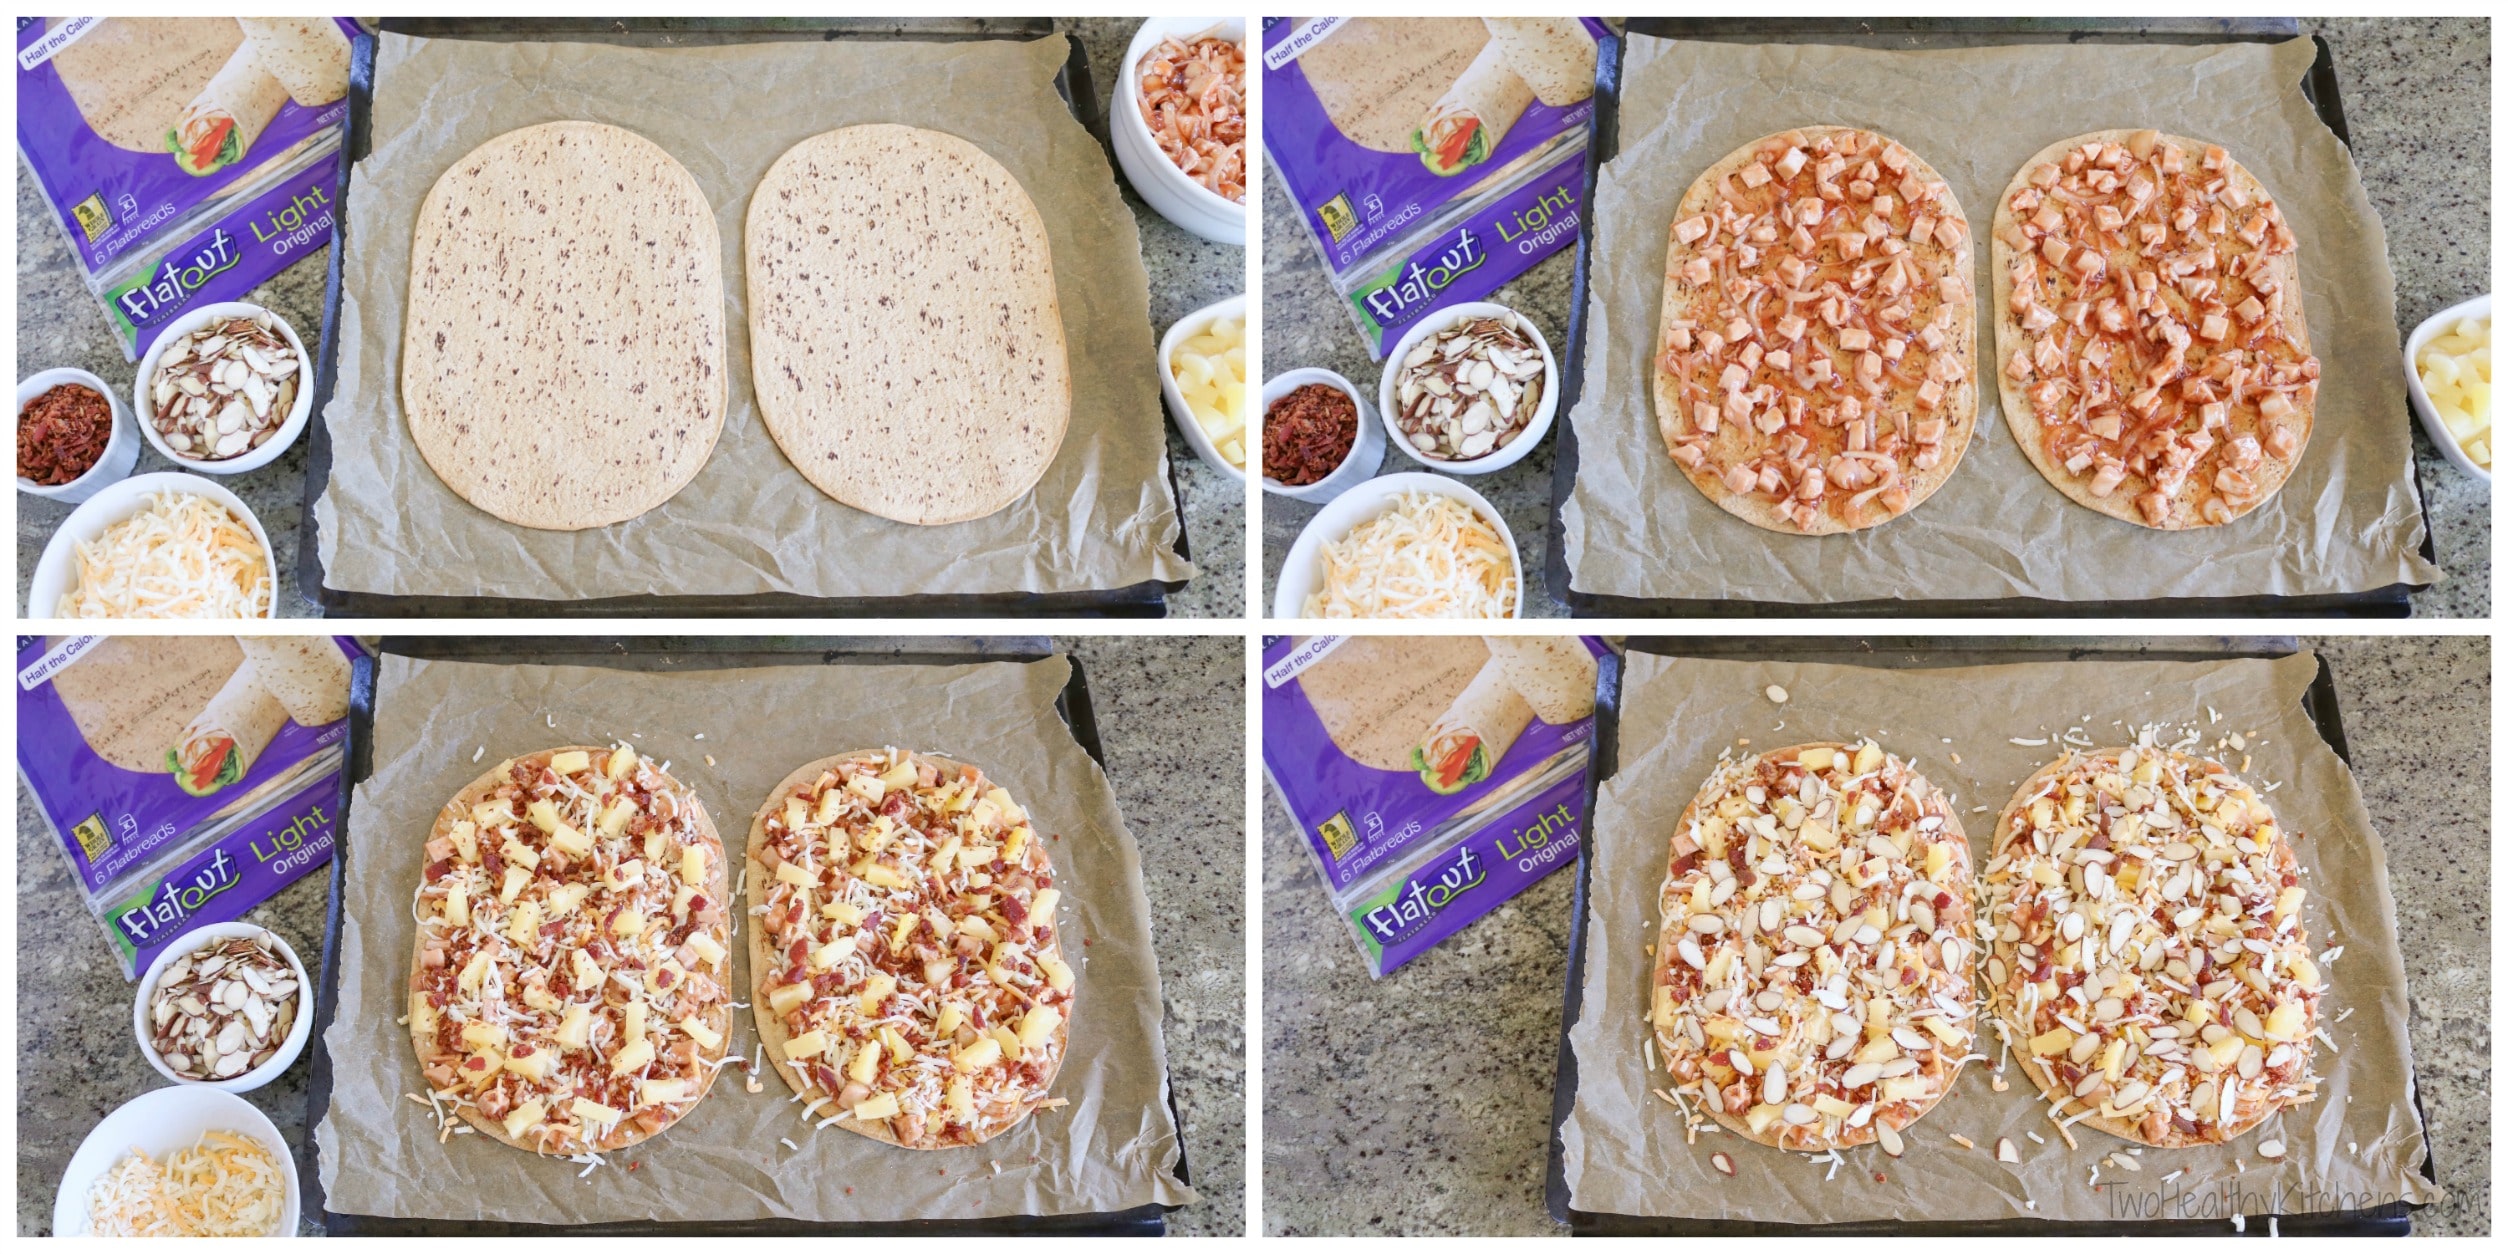 Collage of 4 photos showing steps in layering toppings to make the flatbreads.